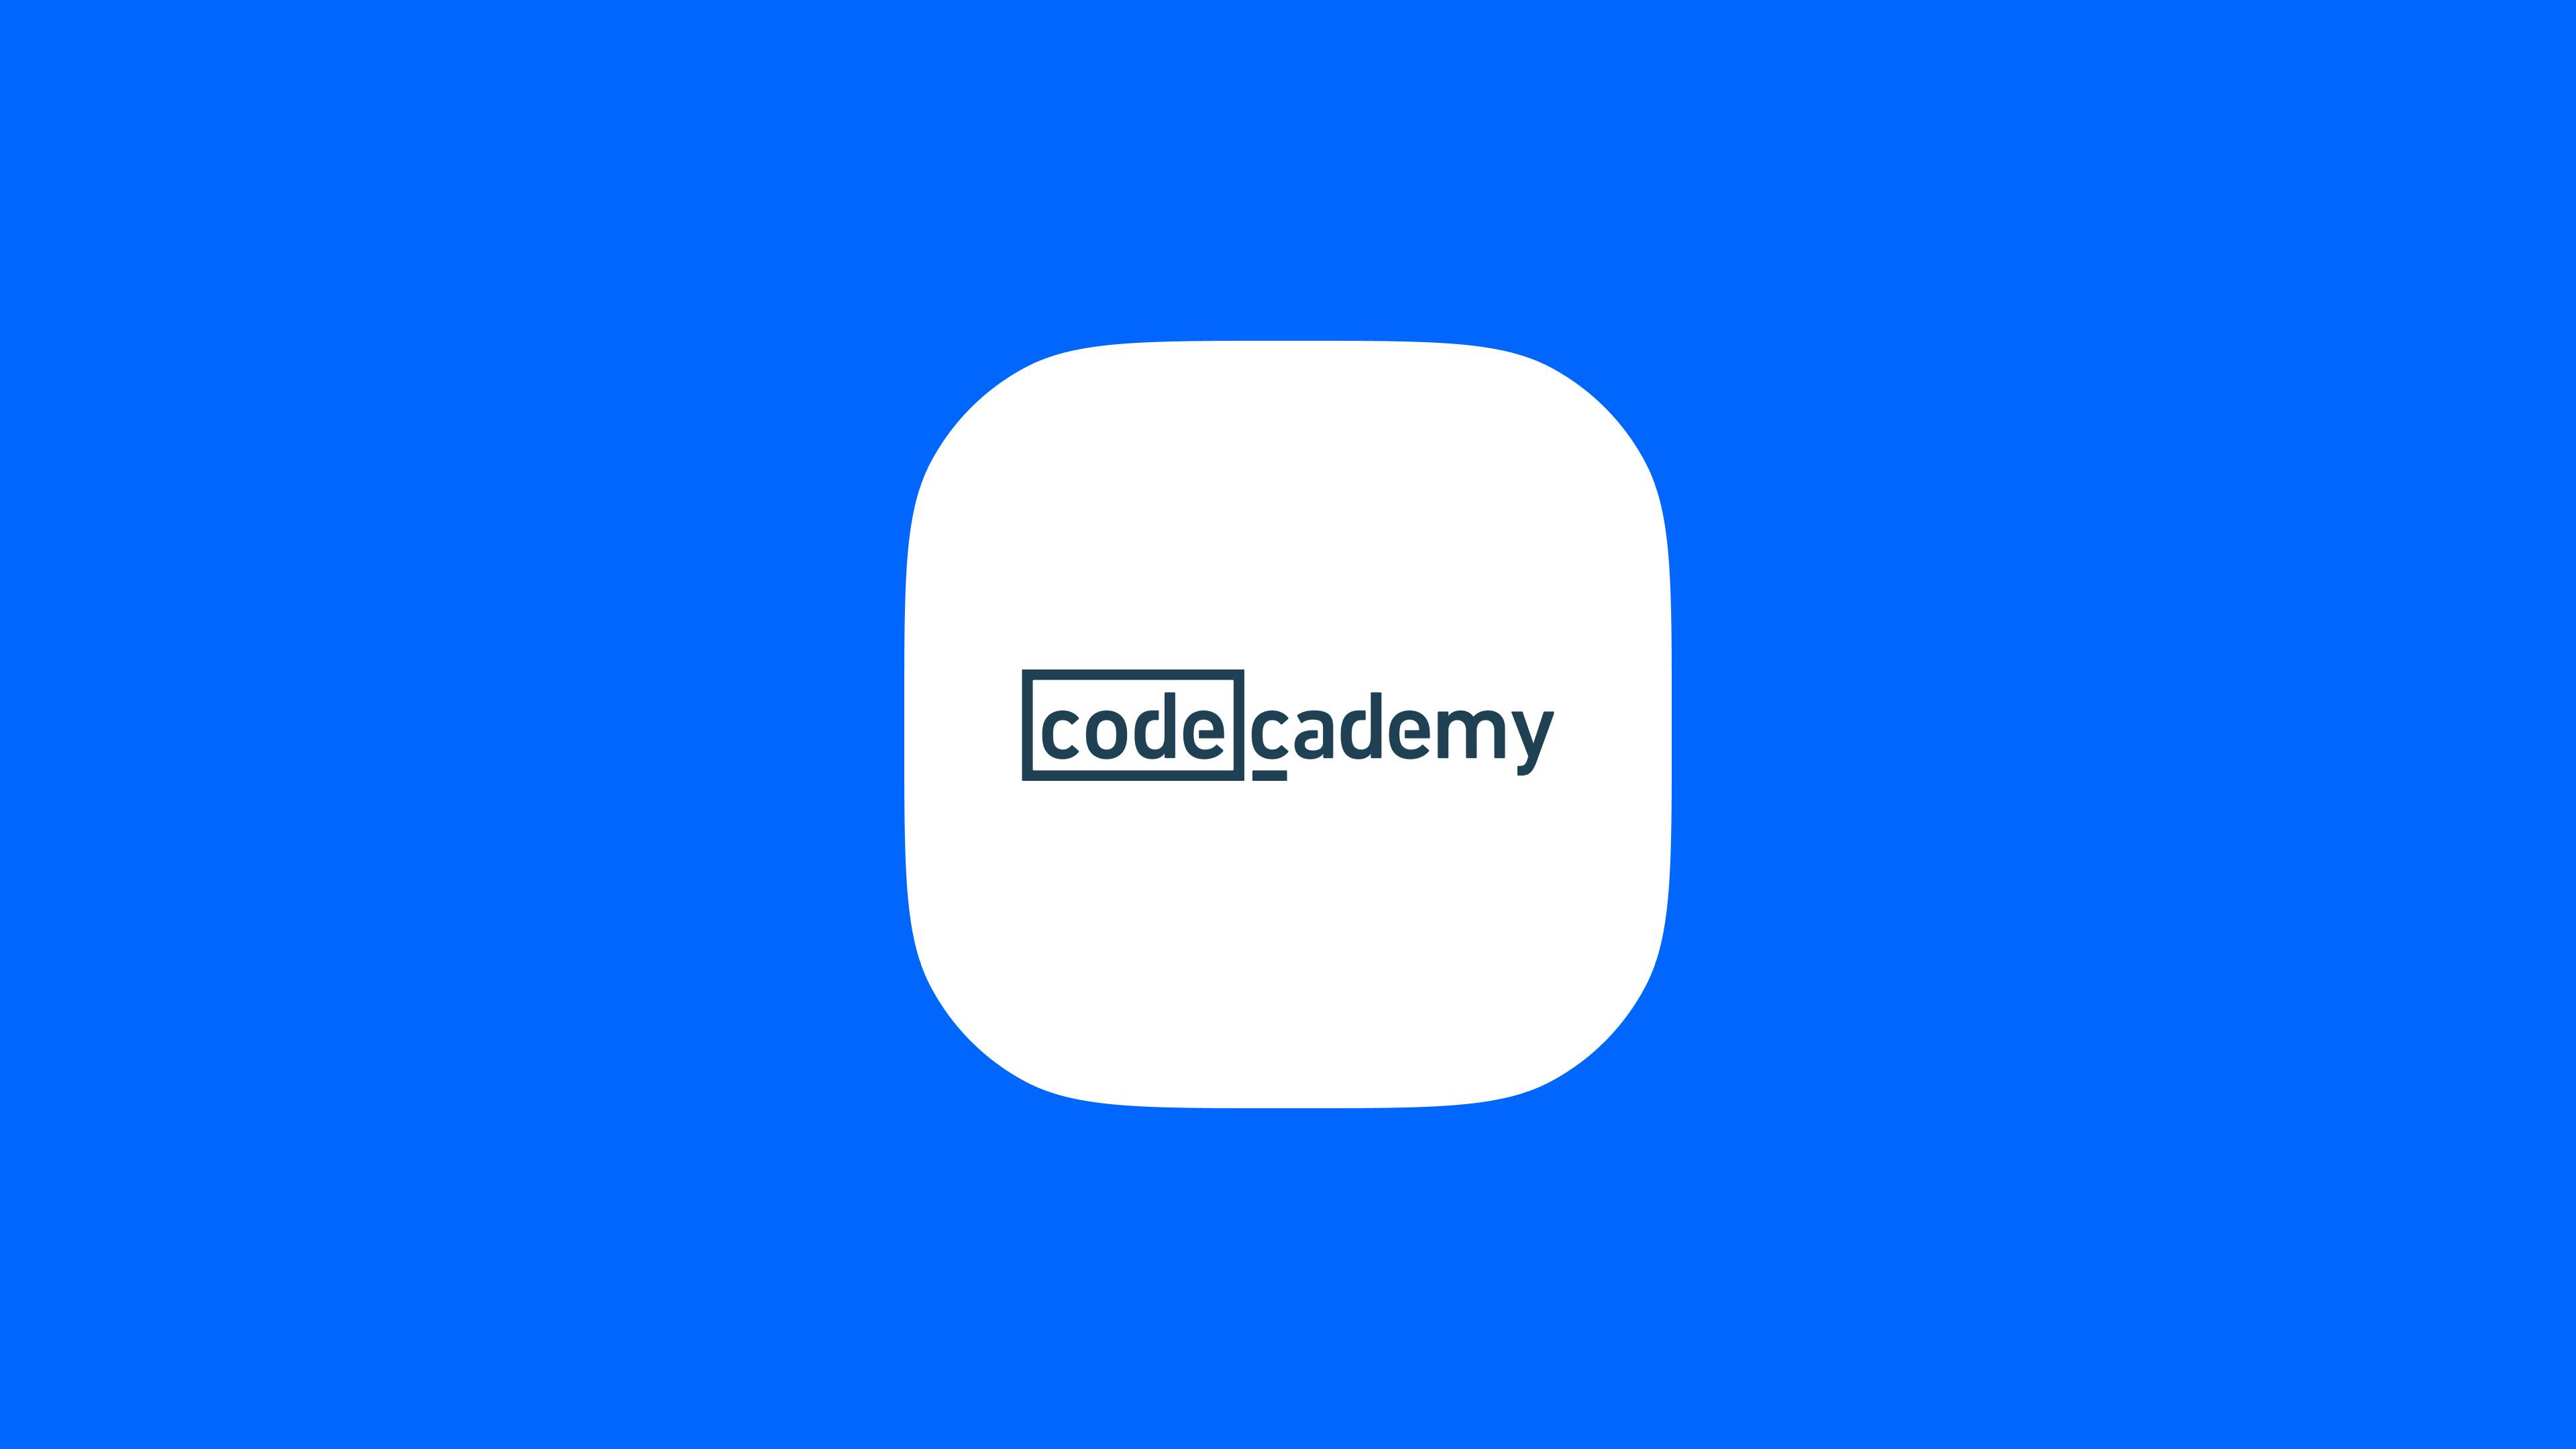 CodeCademy Learning Apps for Adults - Headway